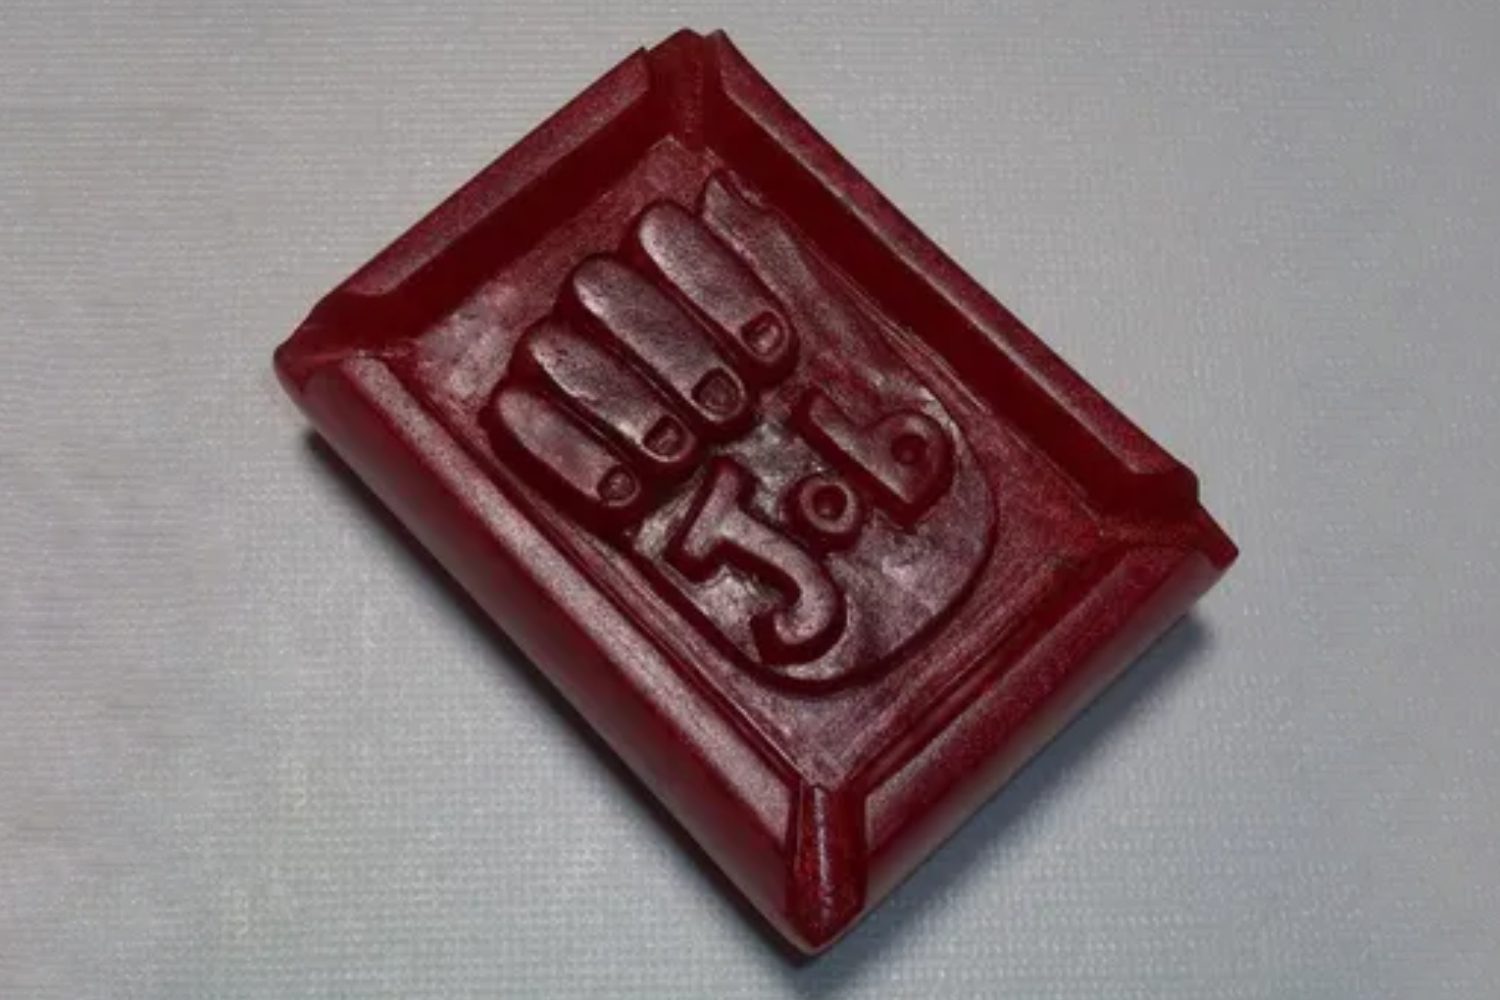 A red rectangular object with the number 5 3 carved into it.